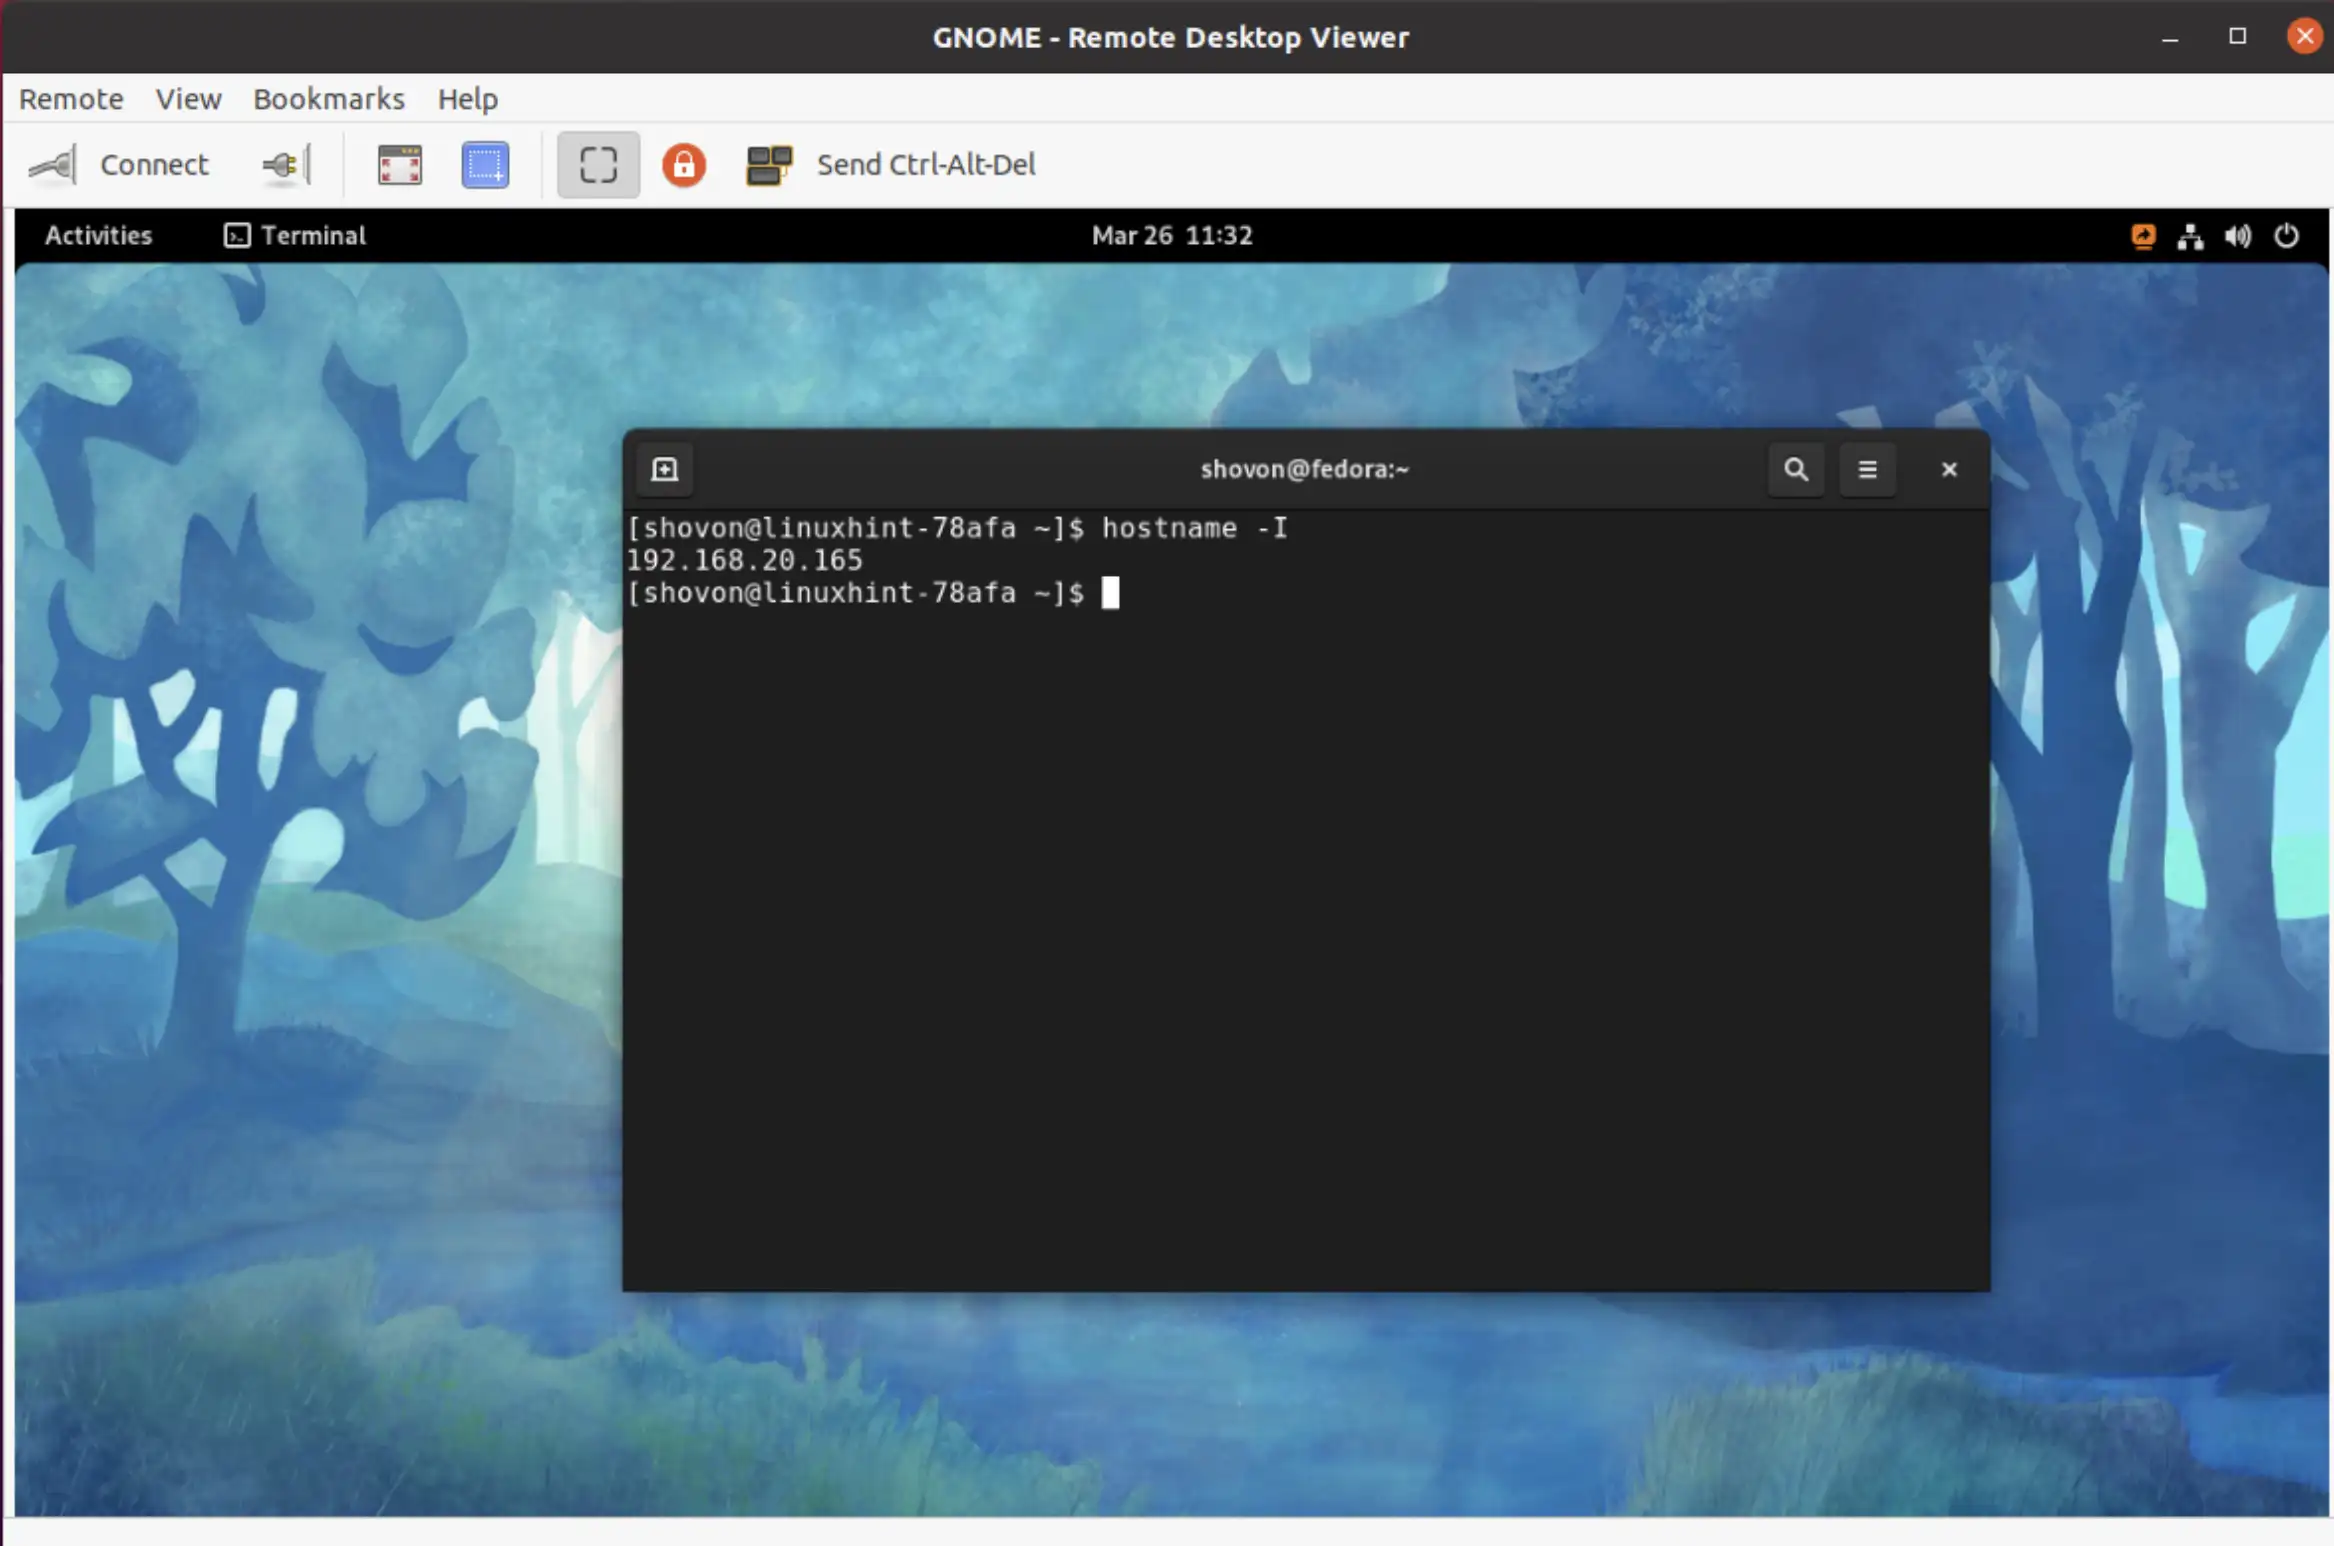 11 Best Remote Desktop Clients For Linux - Fast and Secure